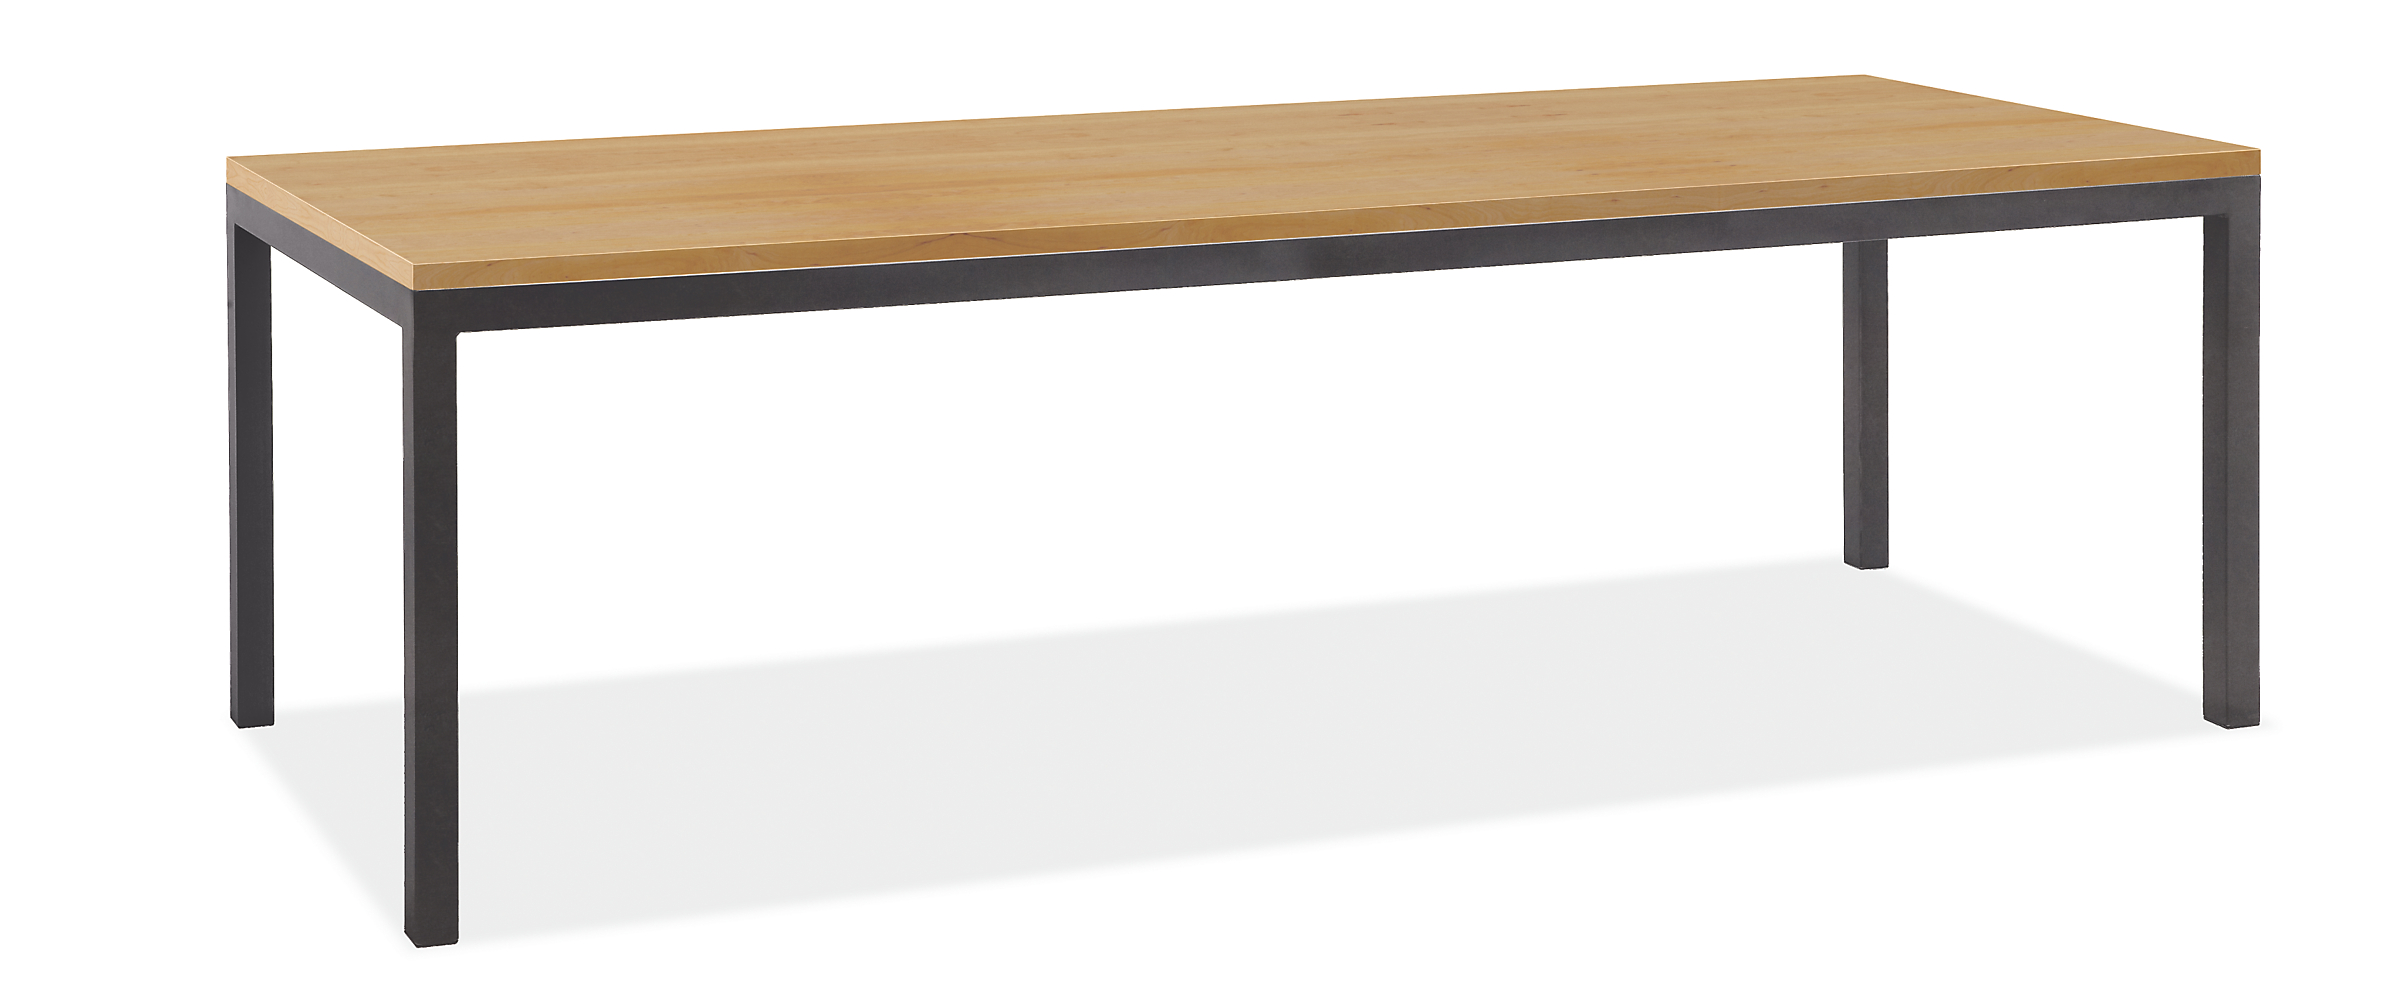 Parsons 96w 34d Table with 2" Leg